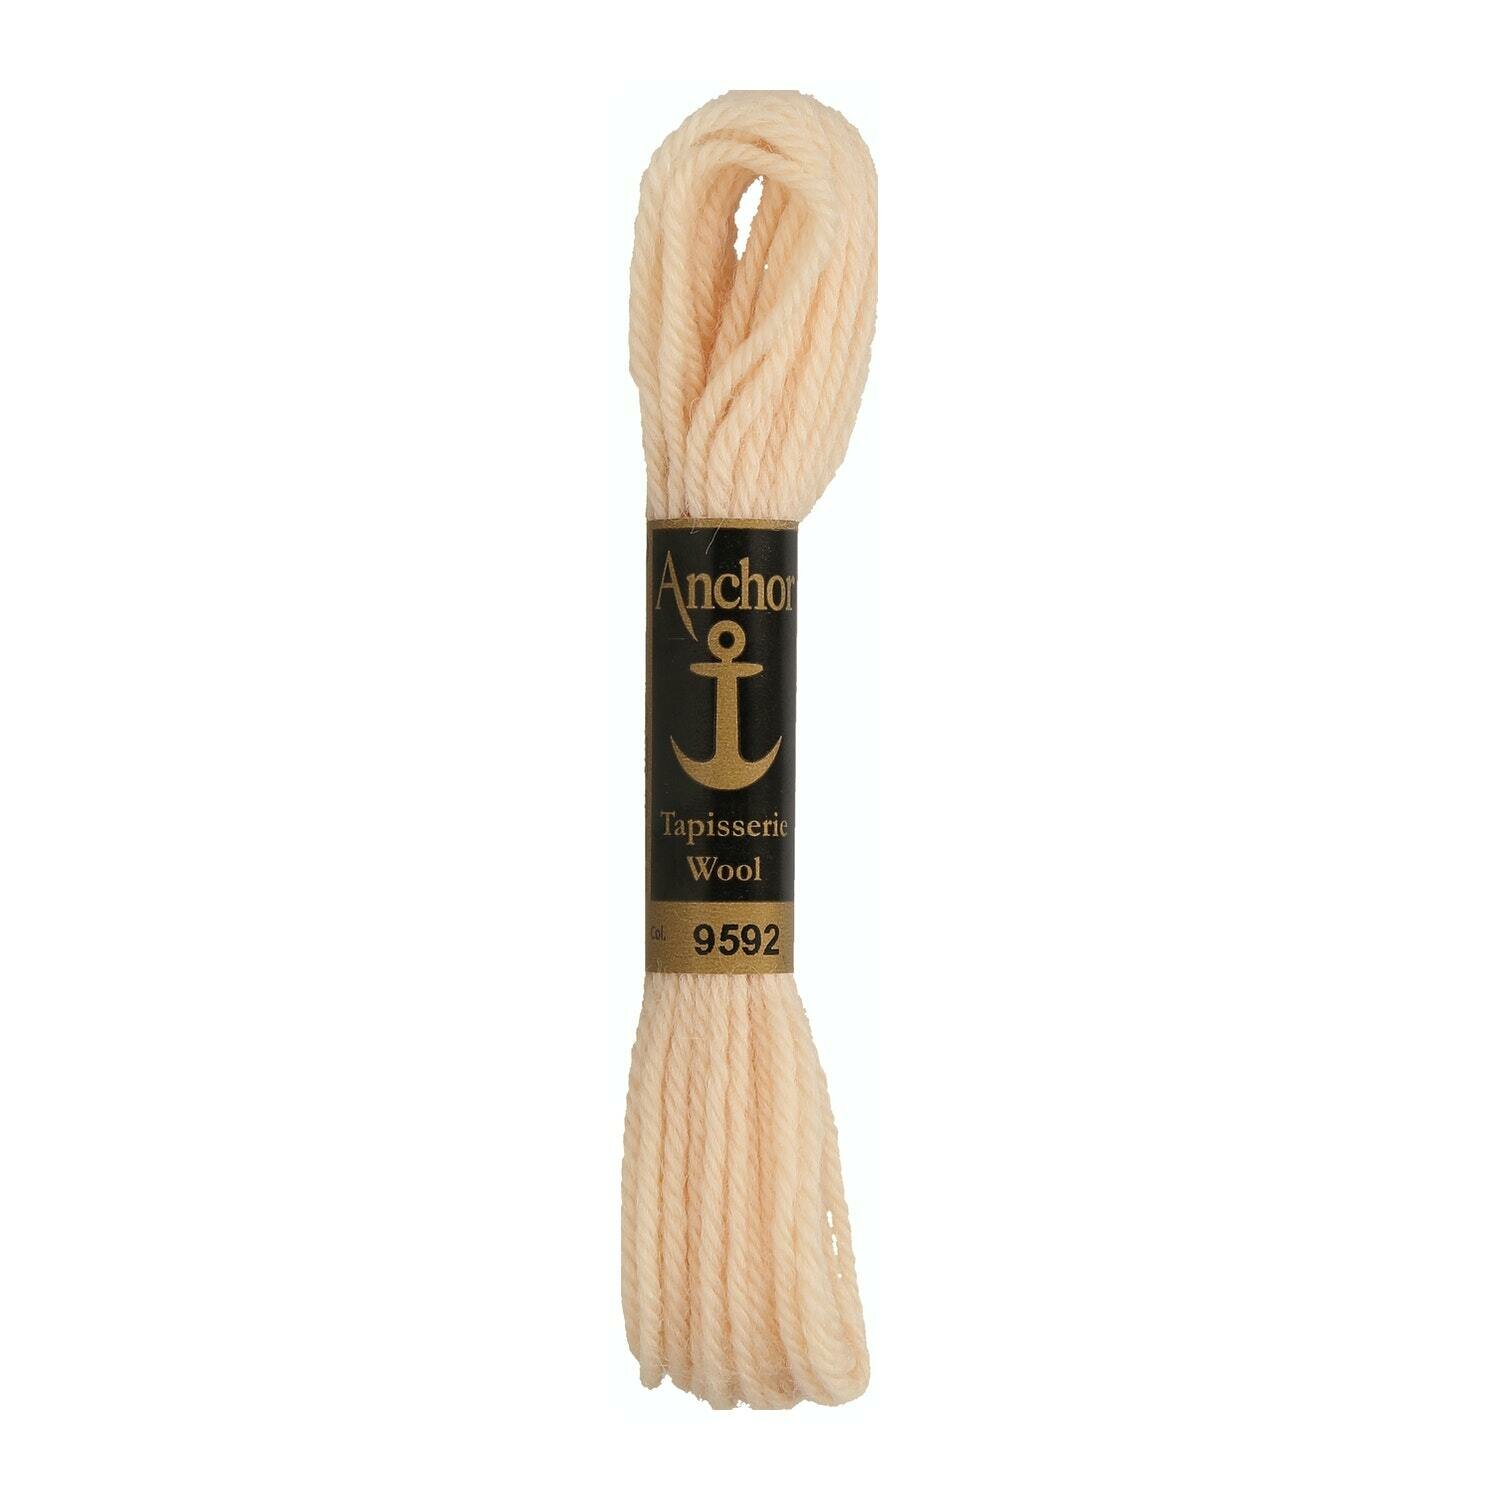 Anchor Tapisserie Wool # 09592